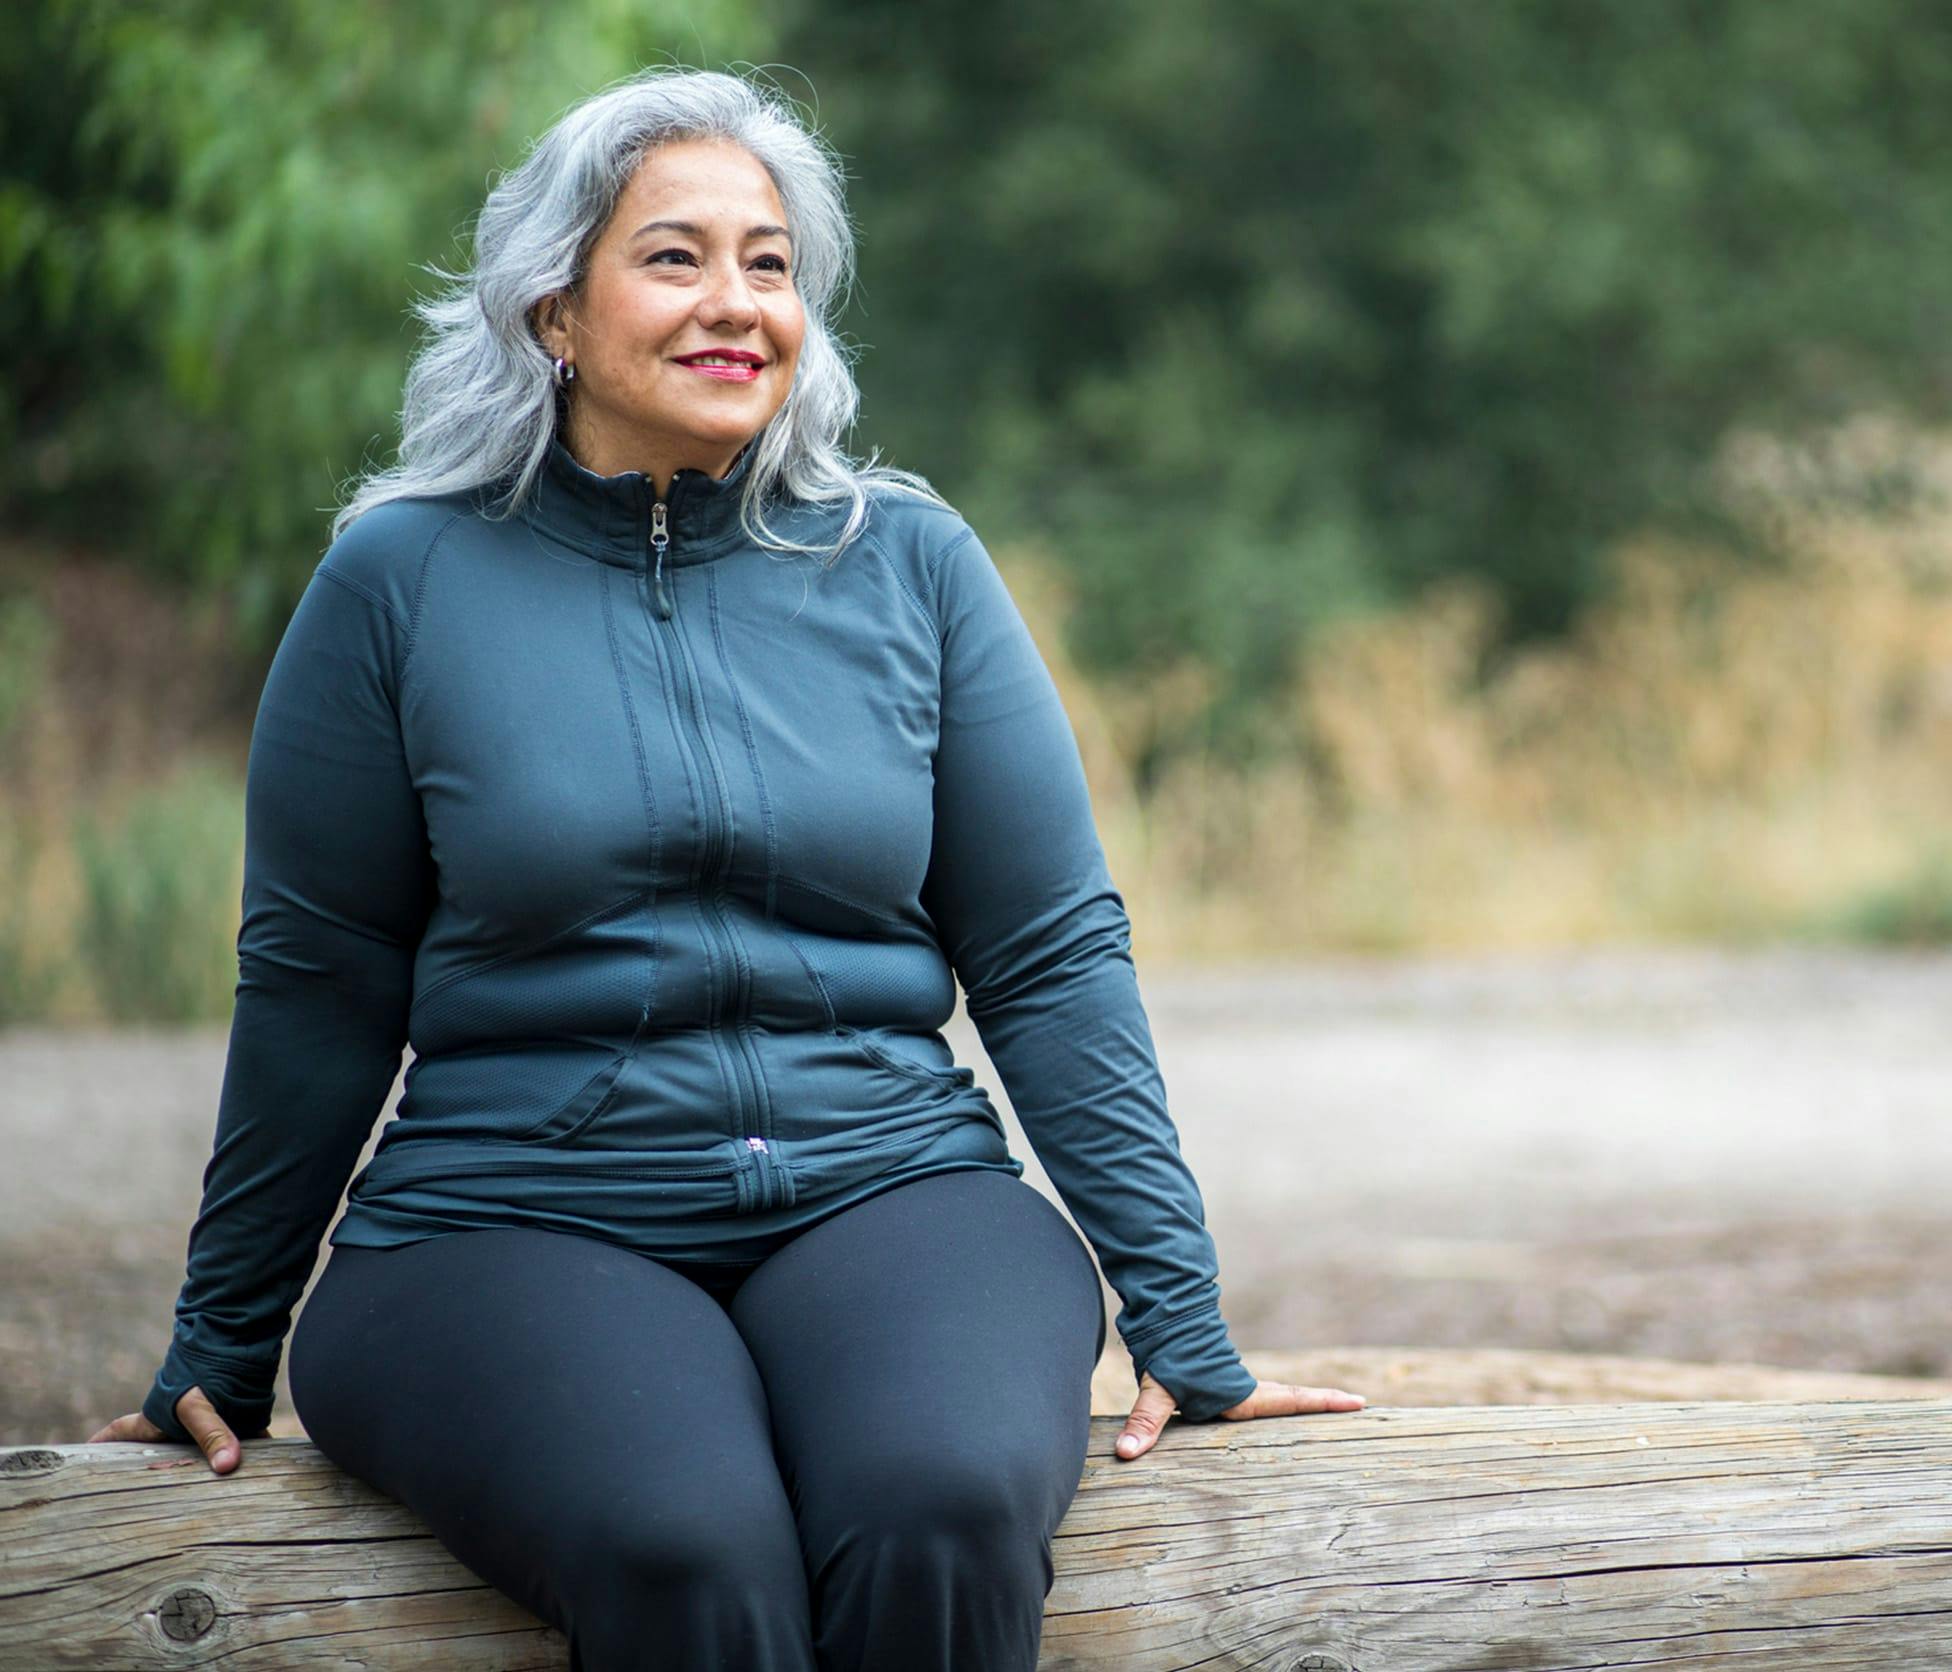 Woman smiling and sitting on log outside